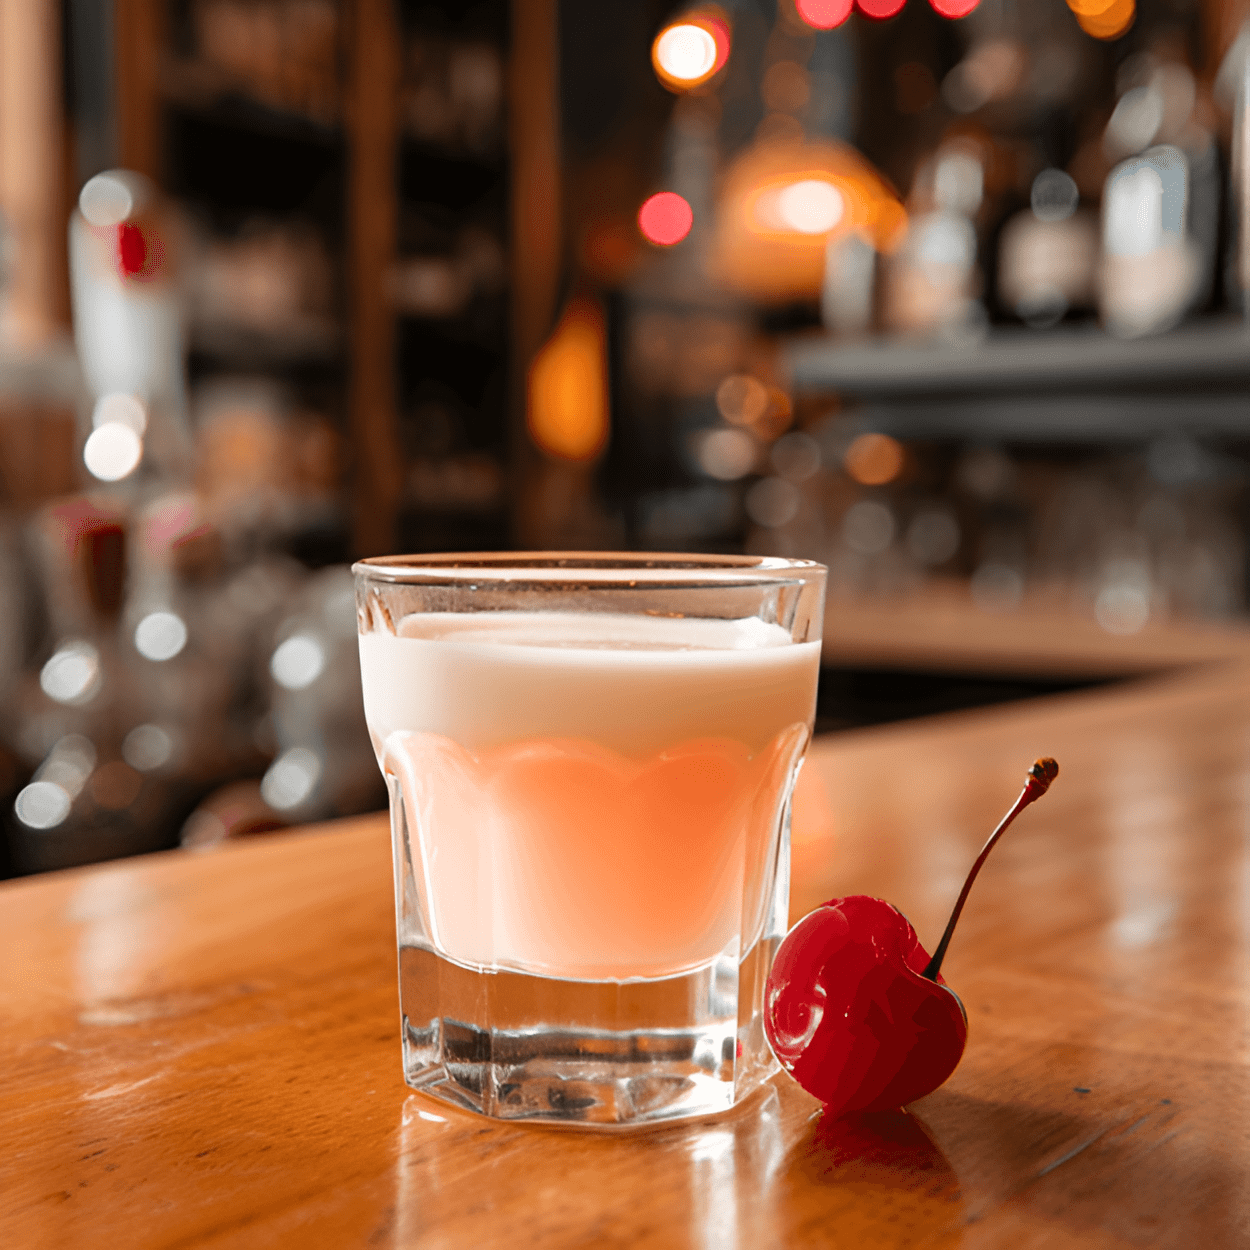 The Brain Hemorrhage has a sweet, creamy taste with a hint of sourness from the schnapps. The Bailey's Irish Cream gives it a smooth, velvety texture.